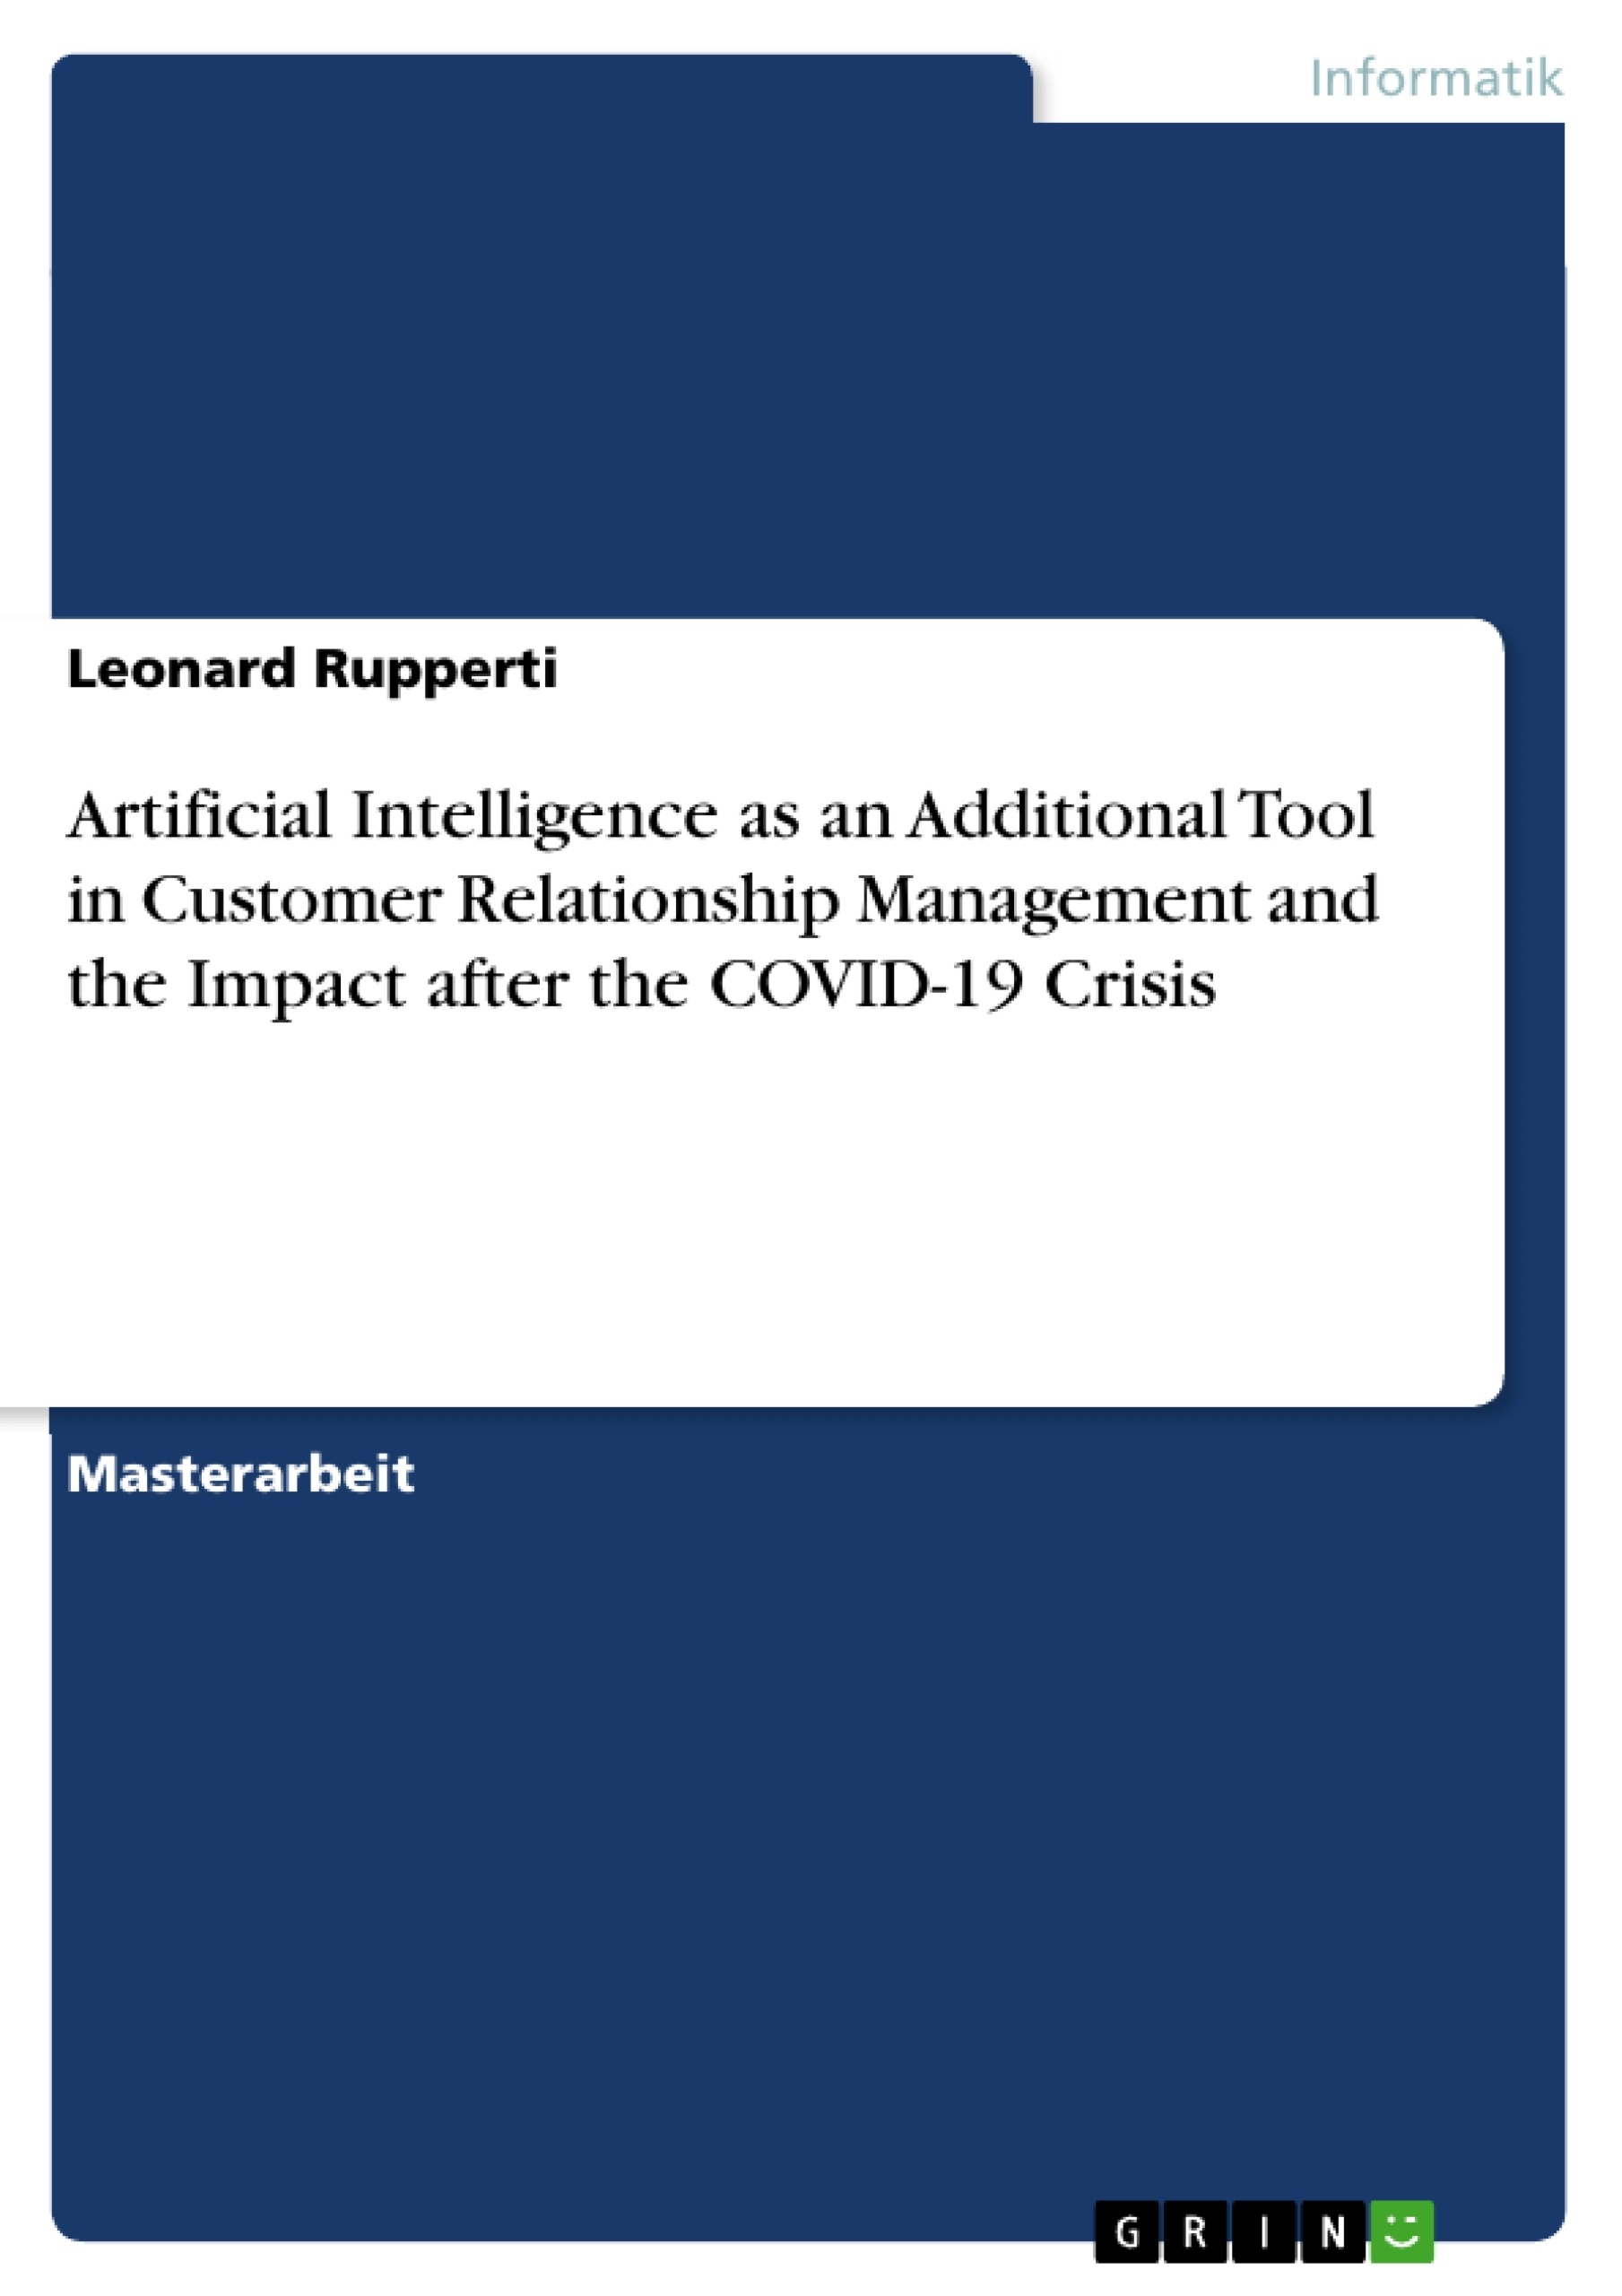 Titel: Artificial Intelligence as an Additional Tool in Customer Relationship Management and the Impact after the COVID-19 Crisis